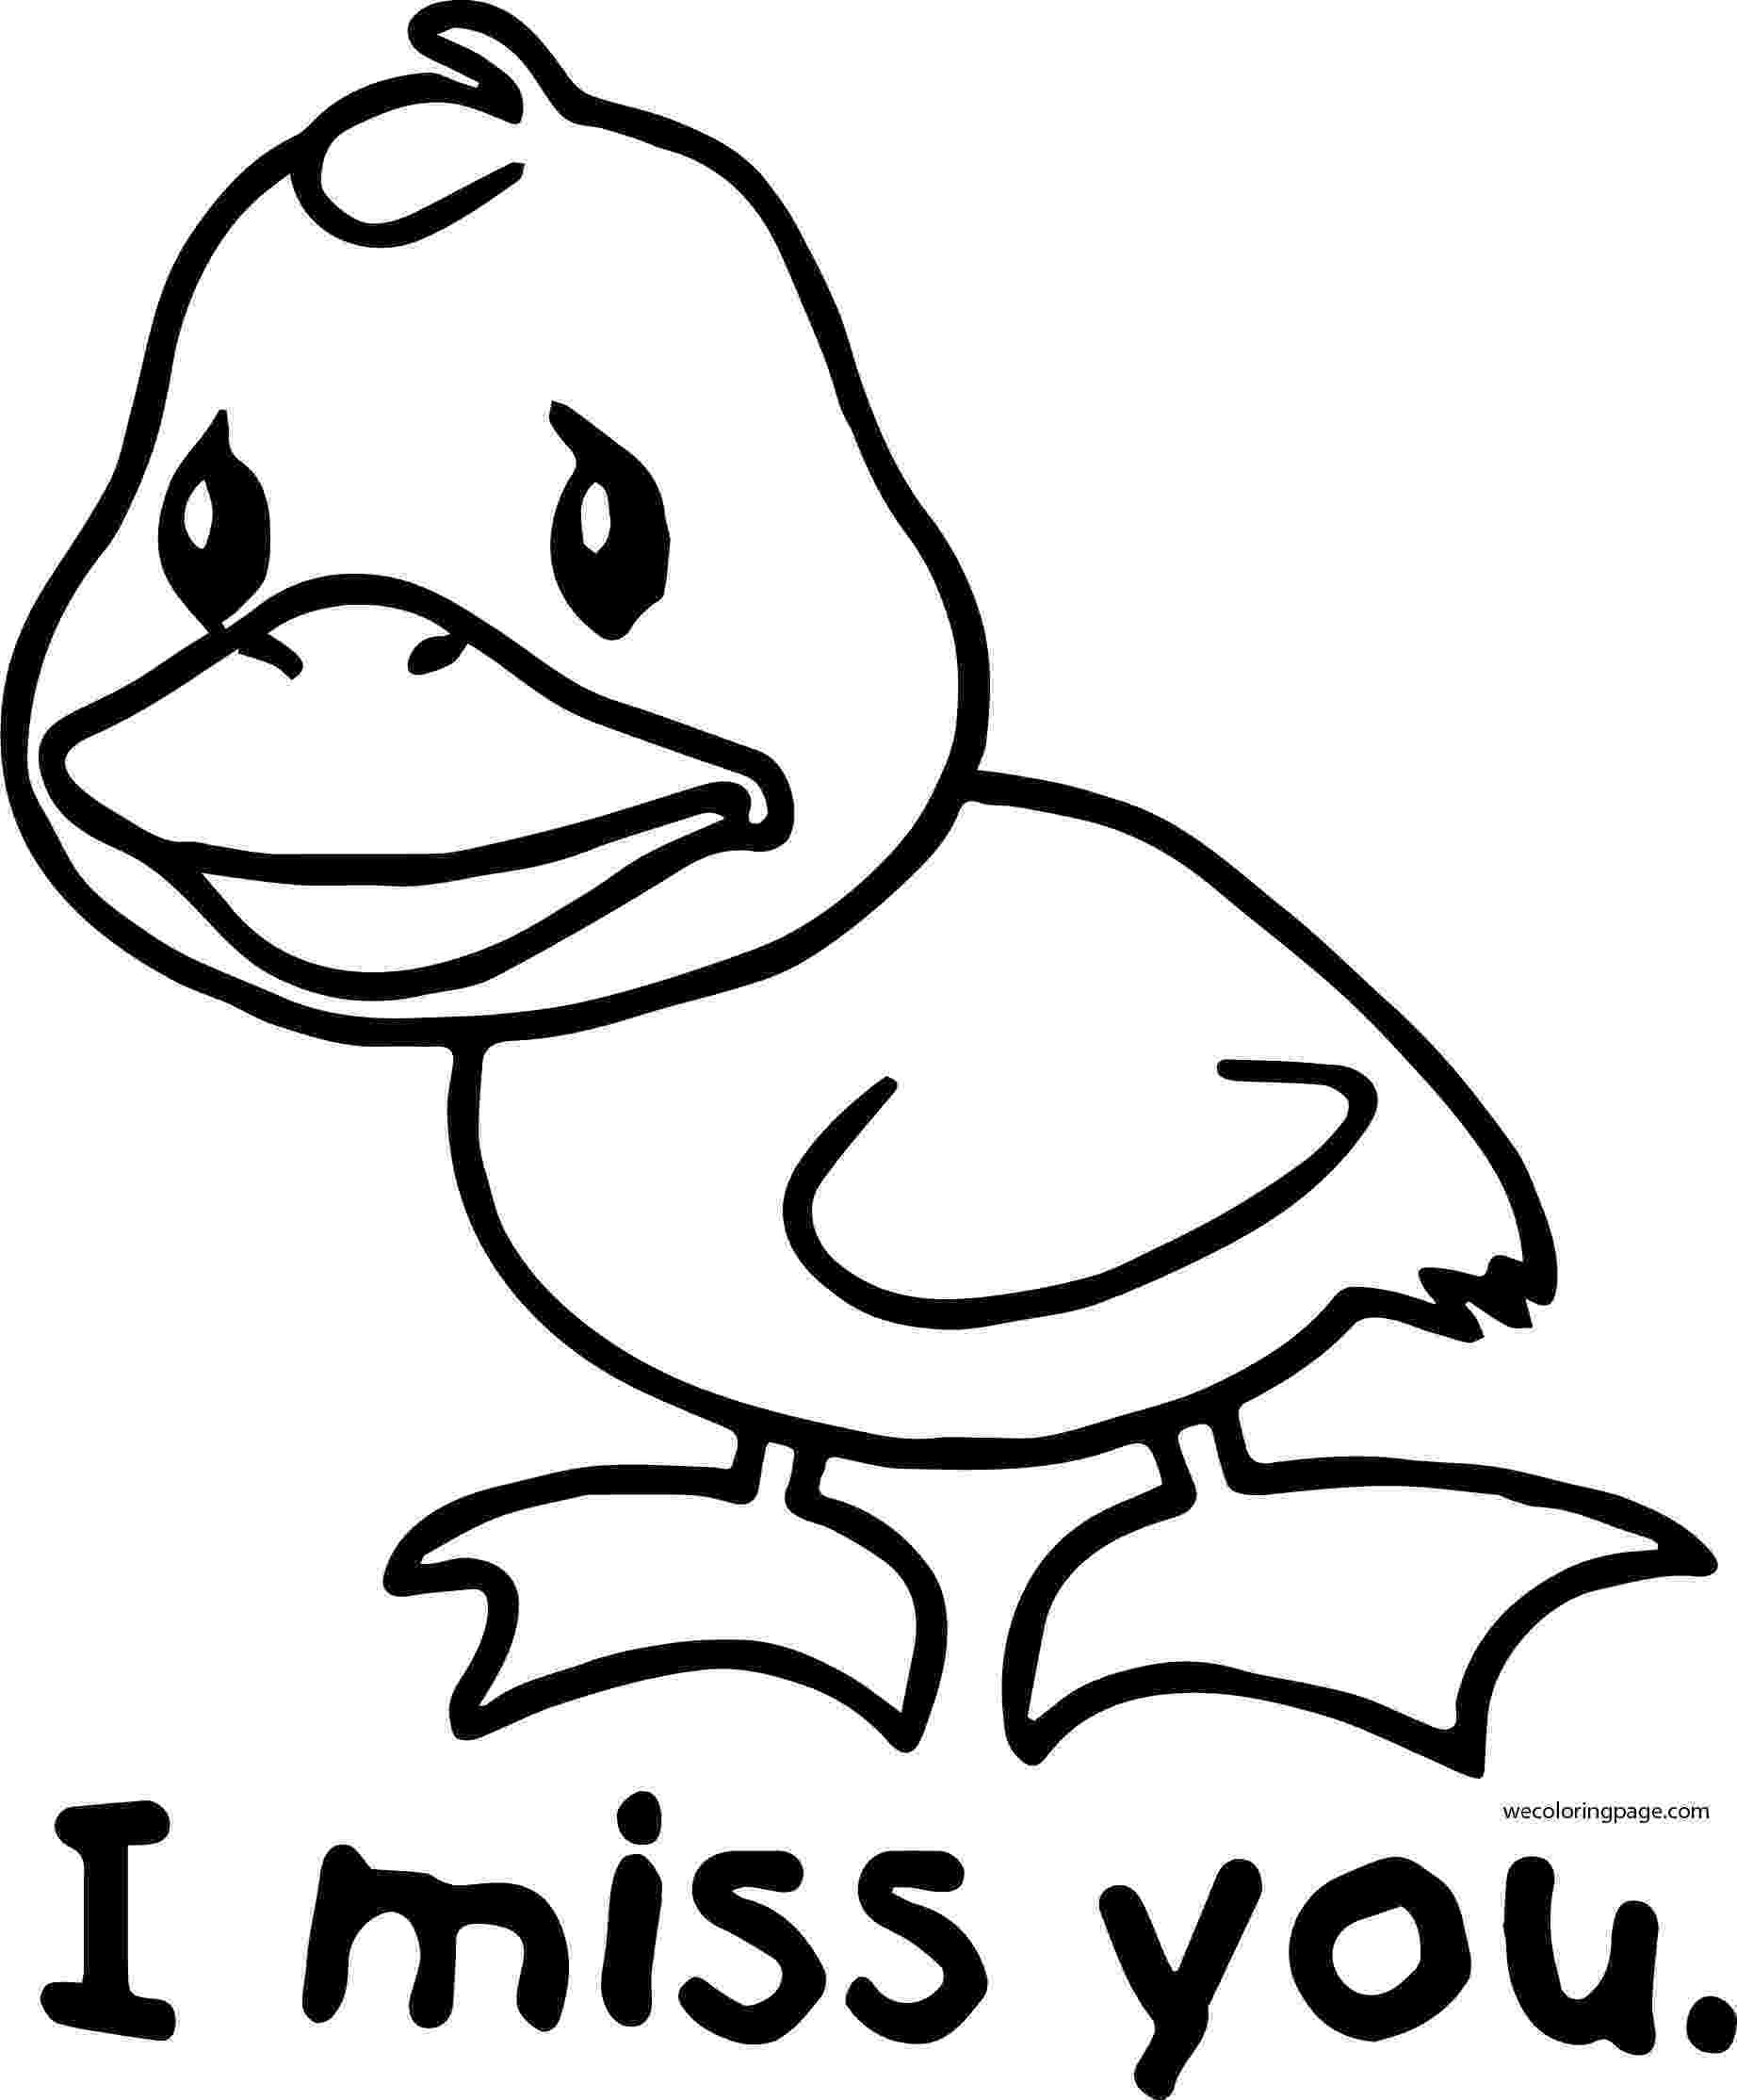 miss you coloring pages we will miss you coloring pages at getdrawings free download miss you coloring pages 